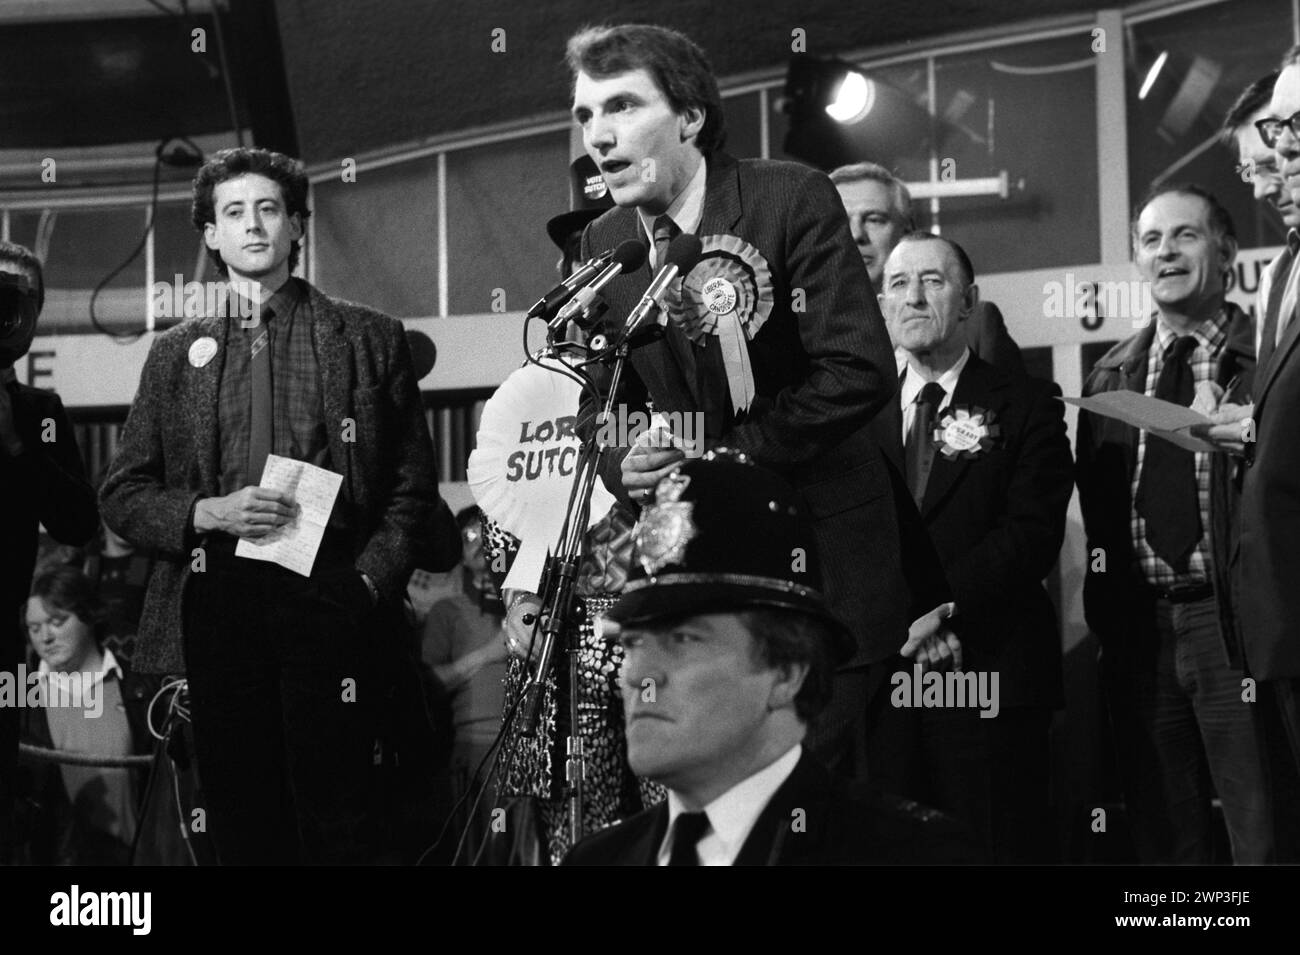 London, England 24th February 1983. Peter Tatchell the Gay Rights campaigner seeks to be elected at the Bermondsey by election South London to the Labour party as a MP. Election night, Tatchell lost to Simon Hughes (Liberal party centre) who is making his acceptance speech. 1980s HOMER SYKES Stock Photo